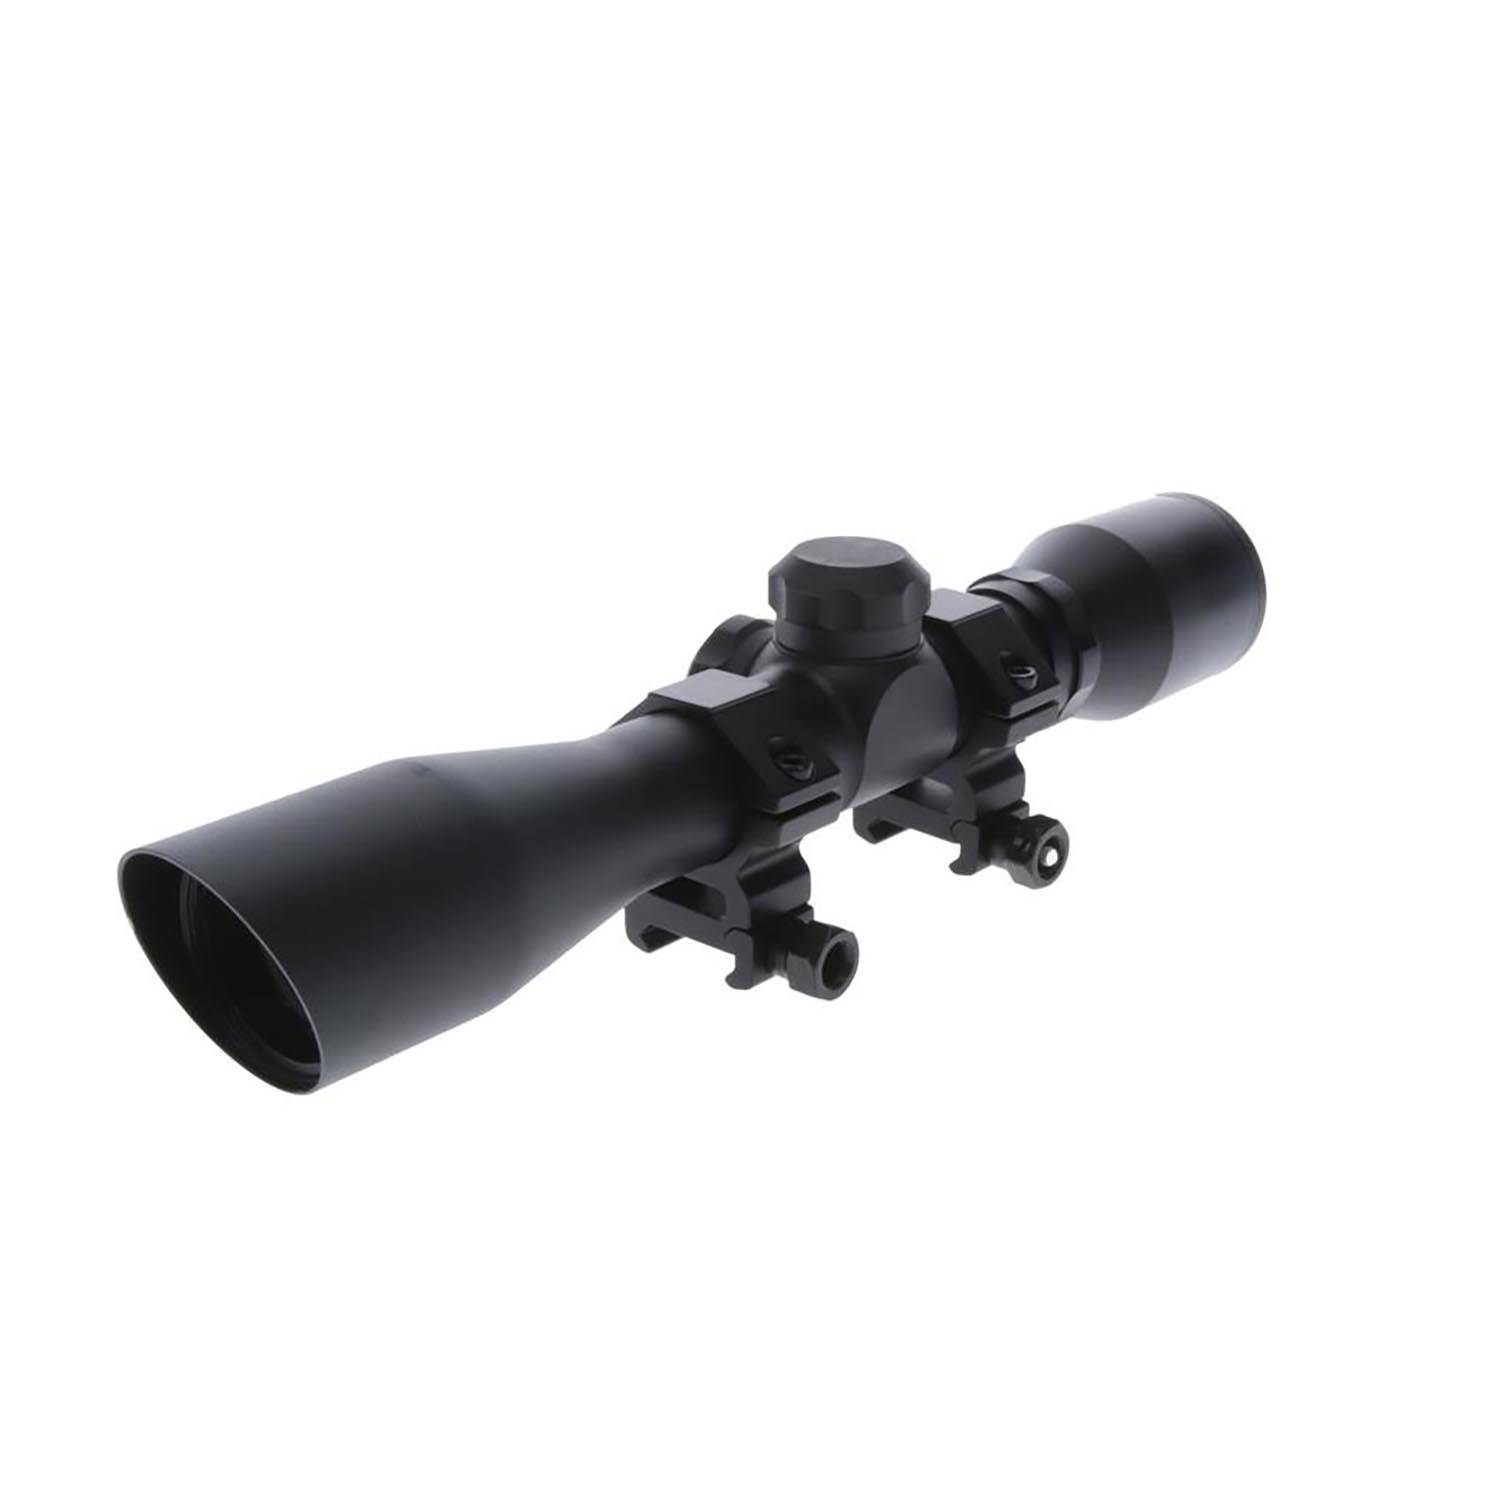 TruGlo 4x32mm Compact Scope with Rings